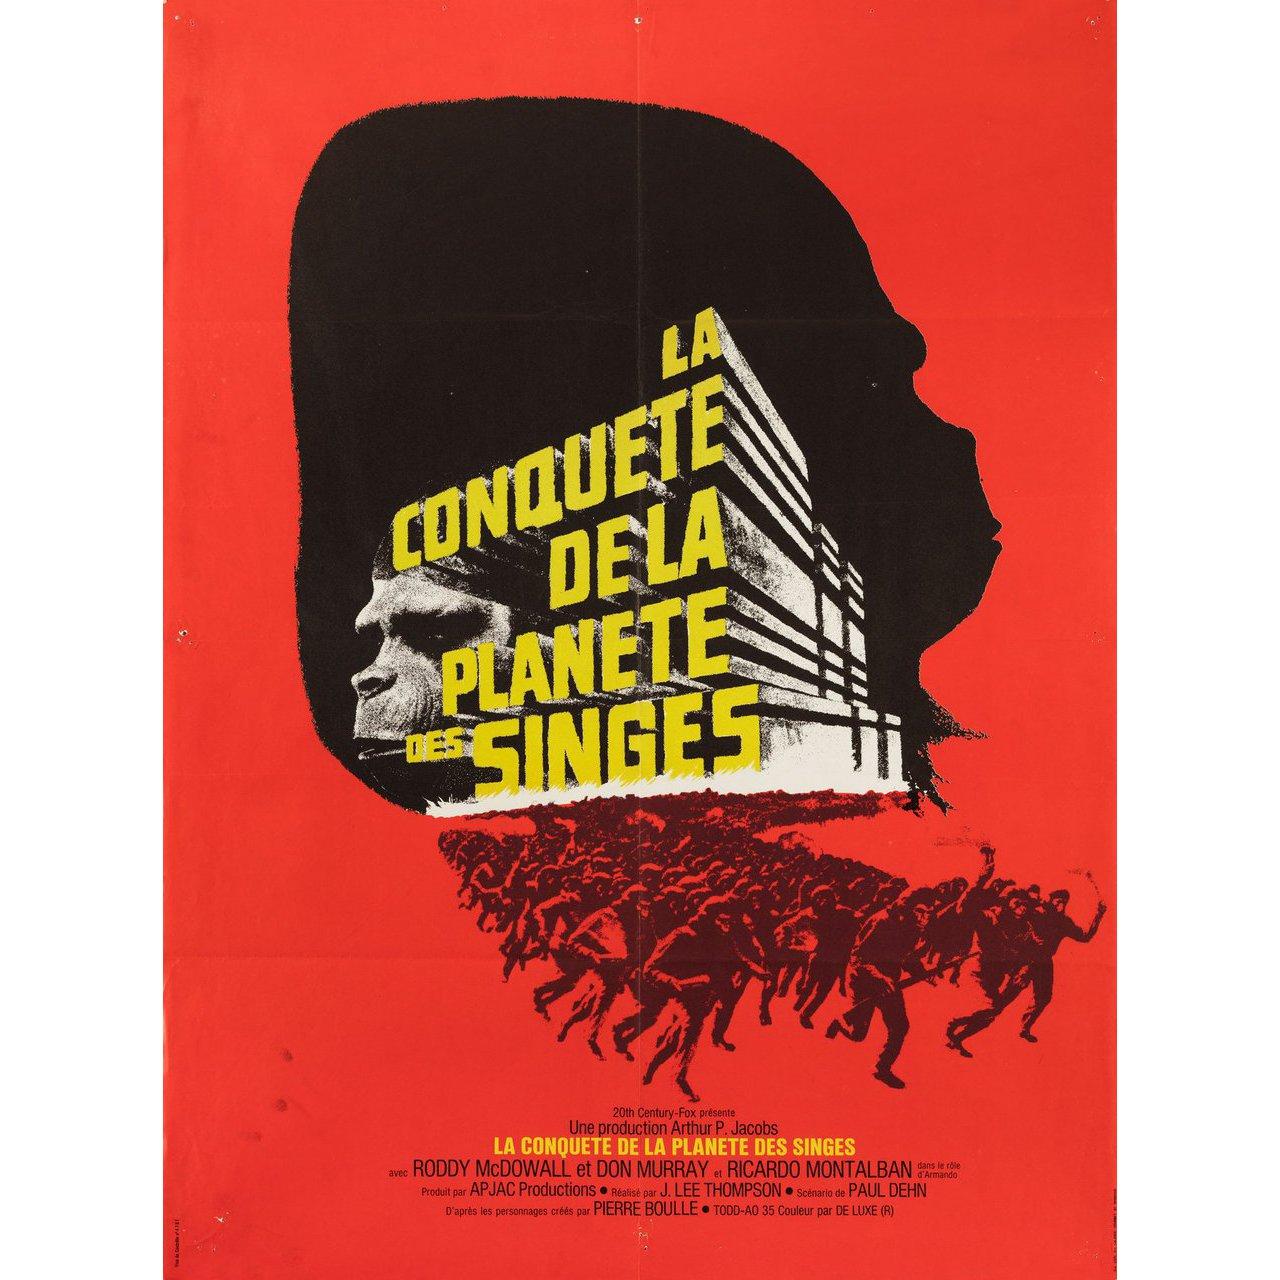 Original 1972 French moyenne poster for the film Conquest of the Planet of the Apes directed by J. Lee Thompson with Roddy McDowall / Don Murray / Natalie Trundy / Hari Rhodes. Very Good condition, folded with pinholes. Many original posters were